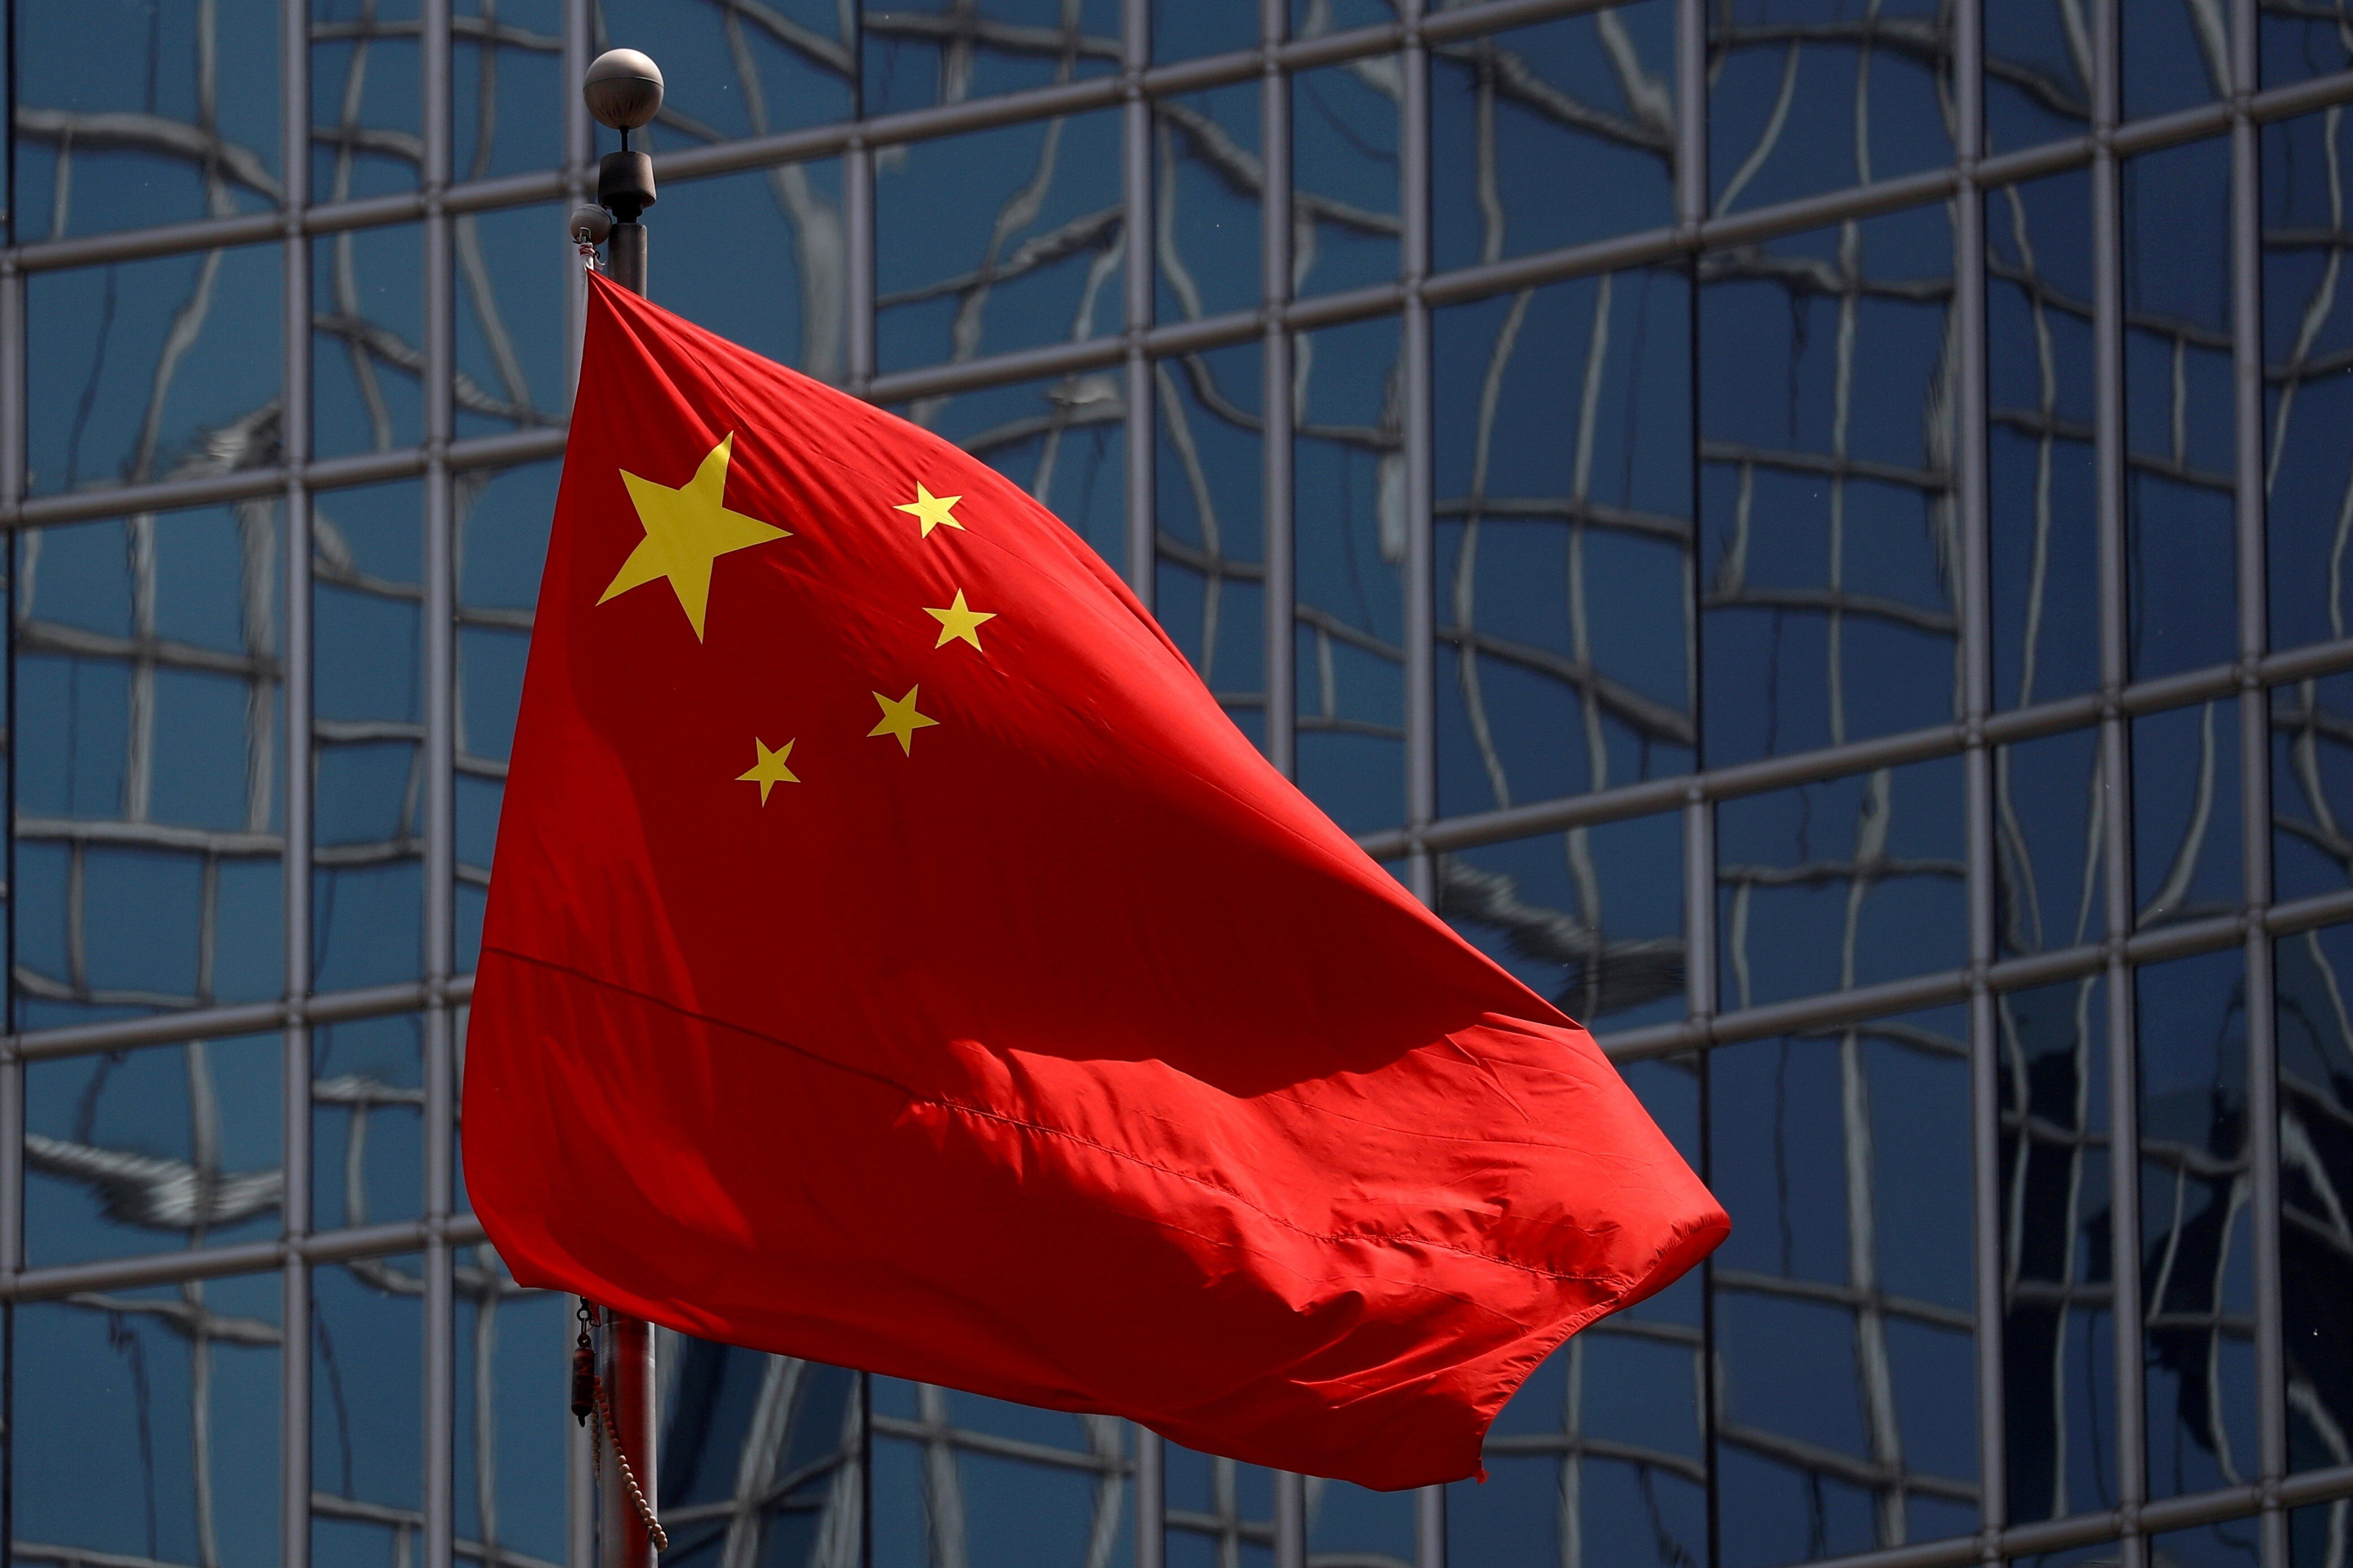 There is also investor uncertainty over how China’s new data laws, particularly the Data Security Law and Personal Information Protection Law, will affect how tech firms access and use data. Photo: Reuters